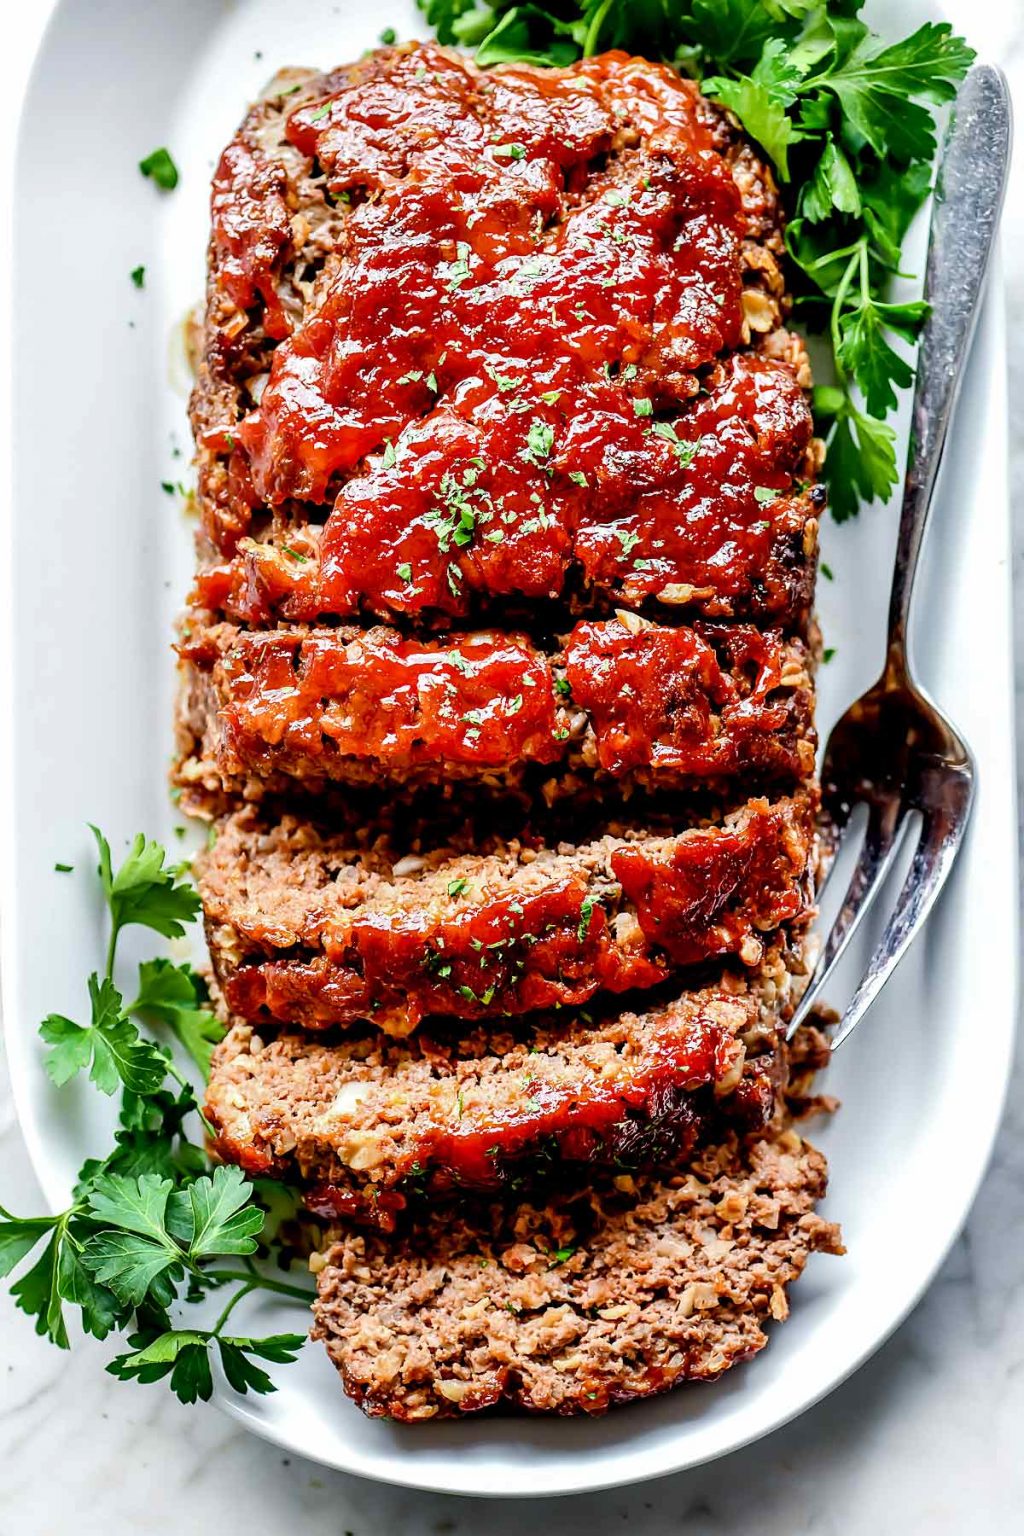 How to Make THE BEST Easy Meatloaf Recipe | foodiecrush.com